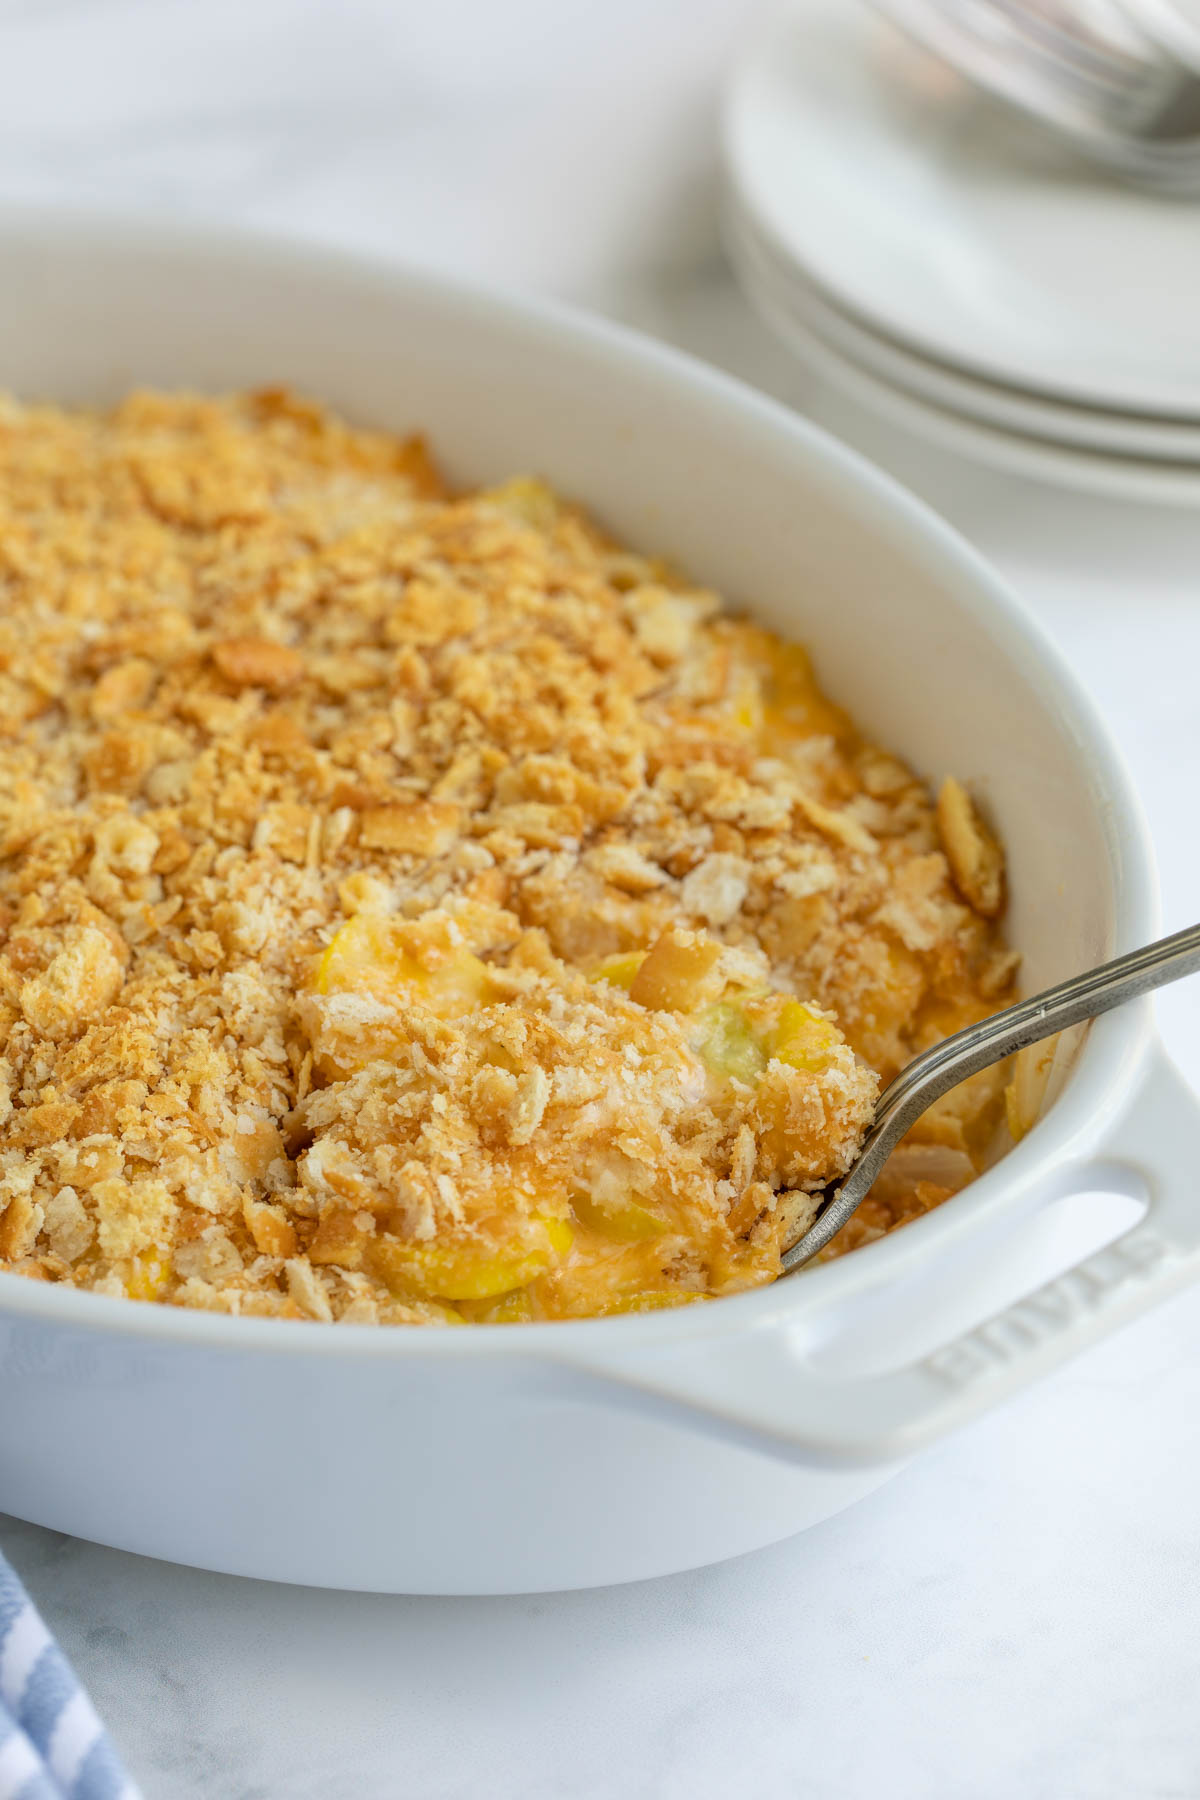 Front view of squash casserole in a white baking dish with a spoon.